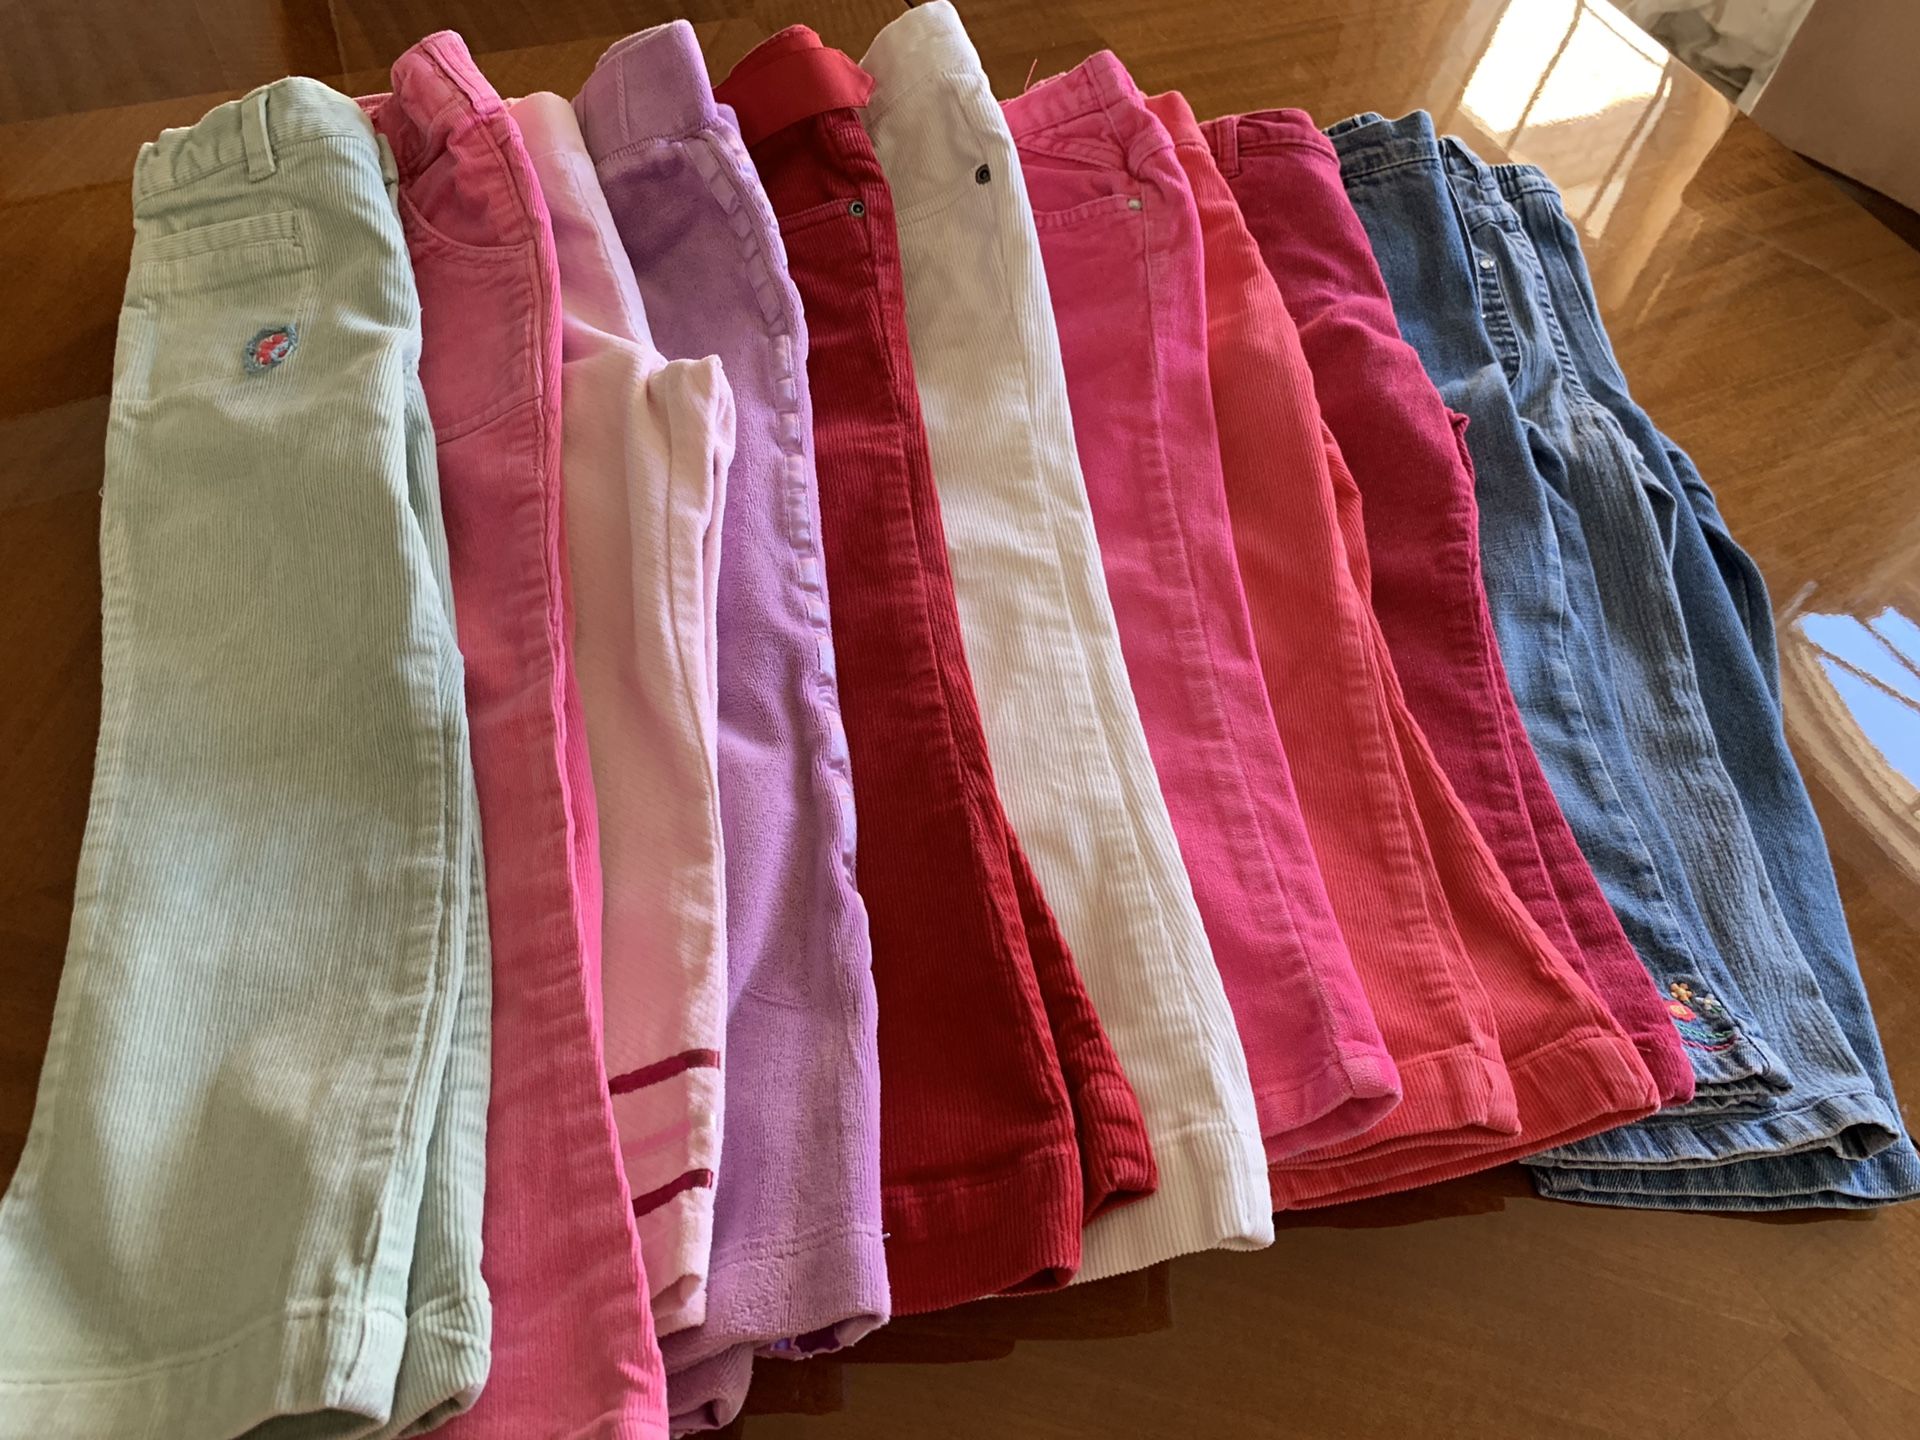 Girls size 3t and 4t bundle pants (12pairs for $35)